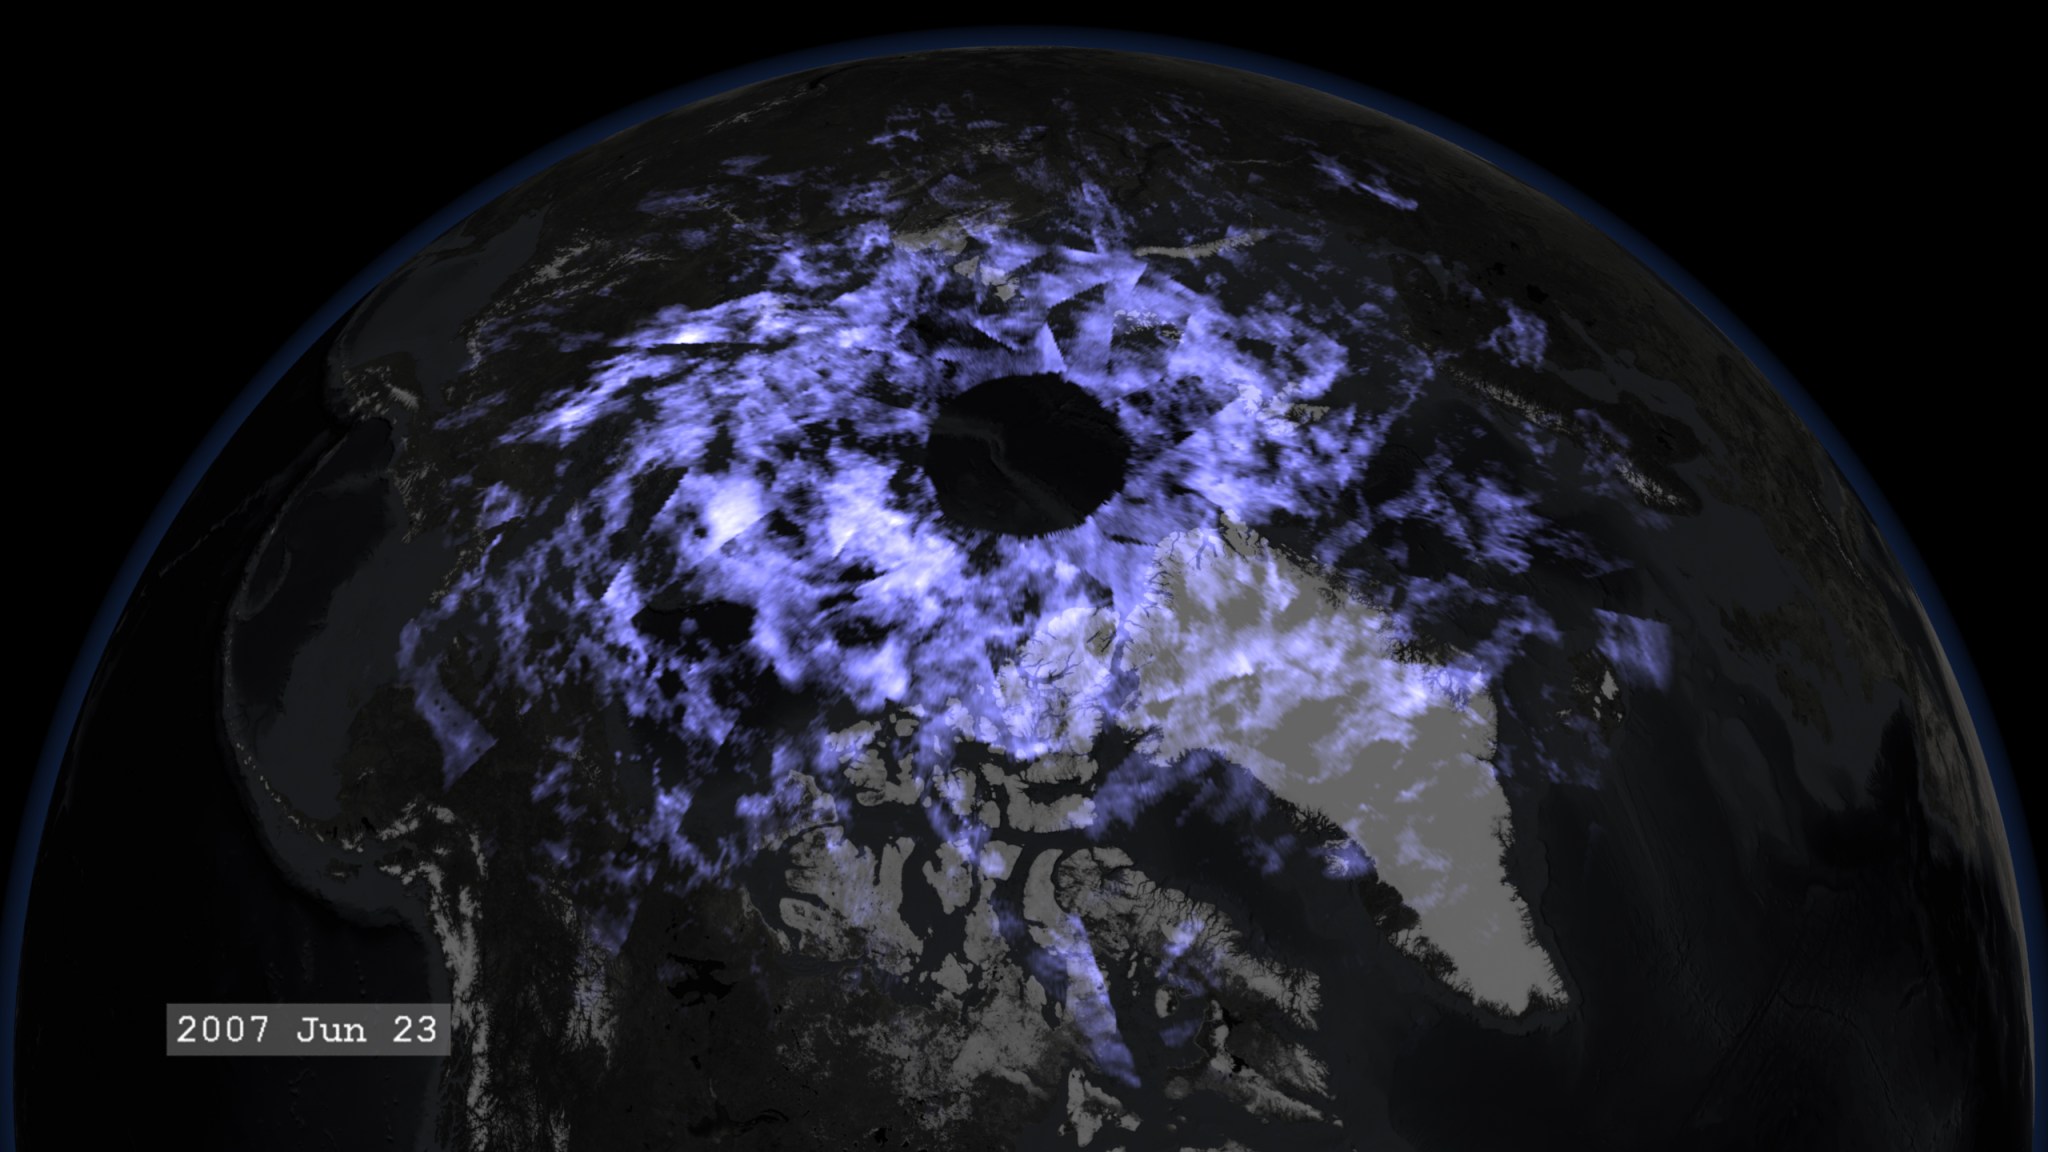 The Earth seen from Above, covered in shining blue clouds. It's dated 2007 Jun 23.